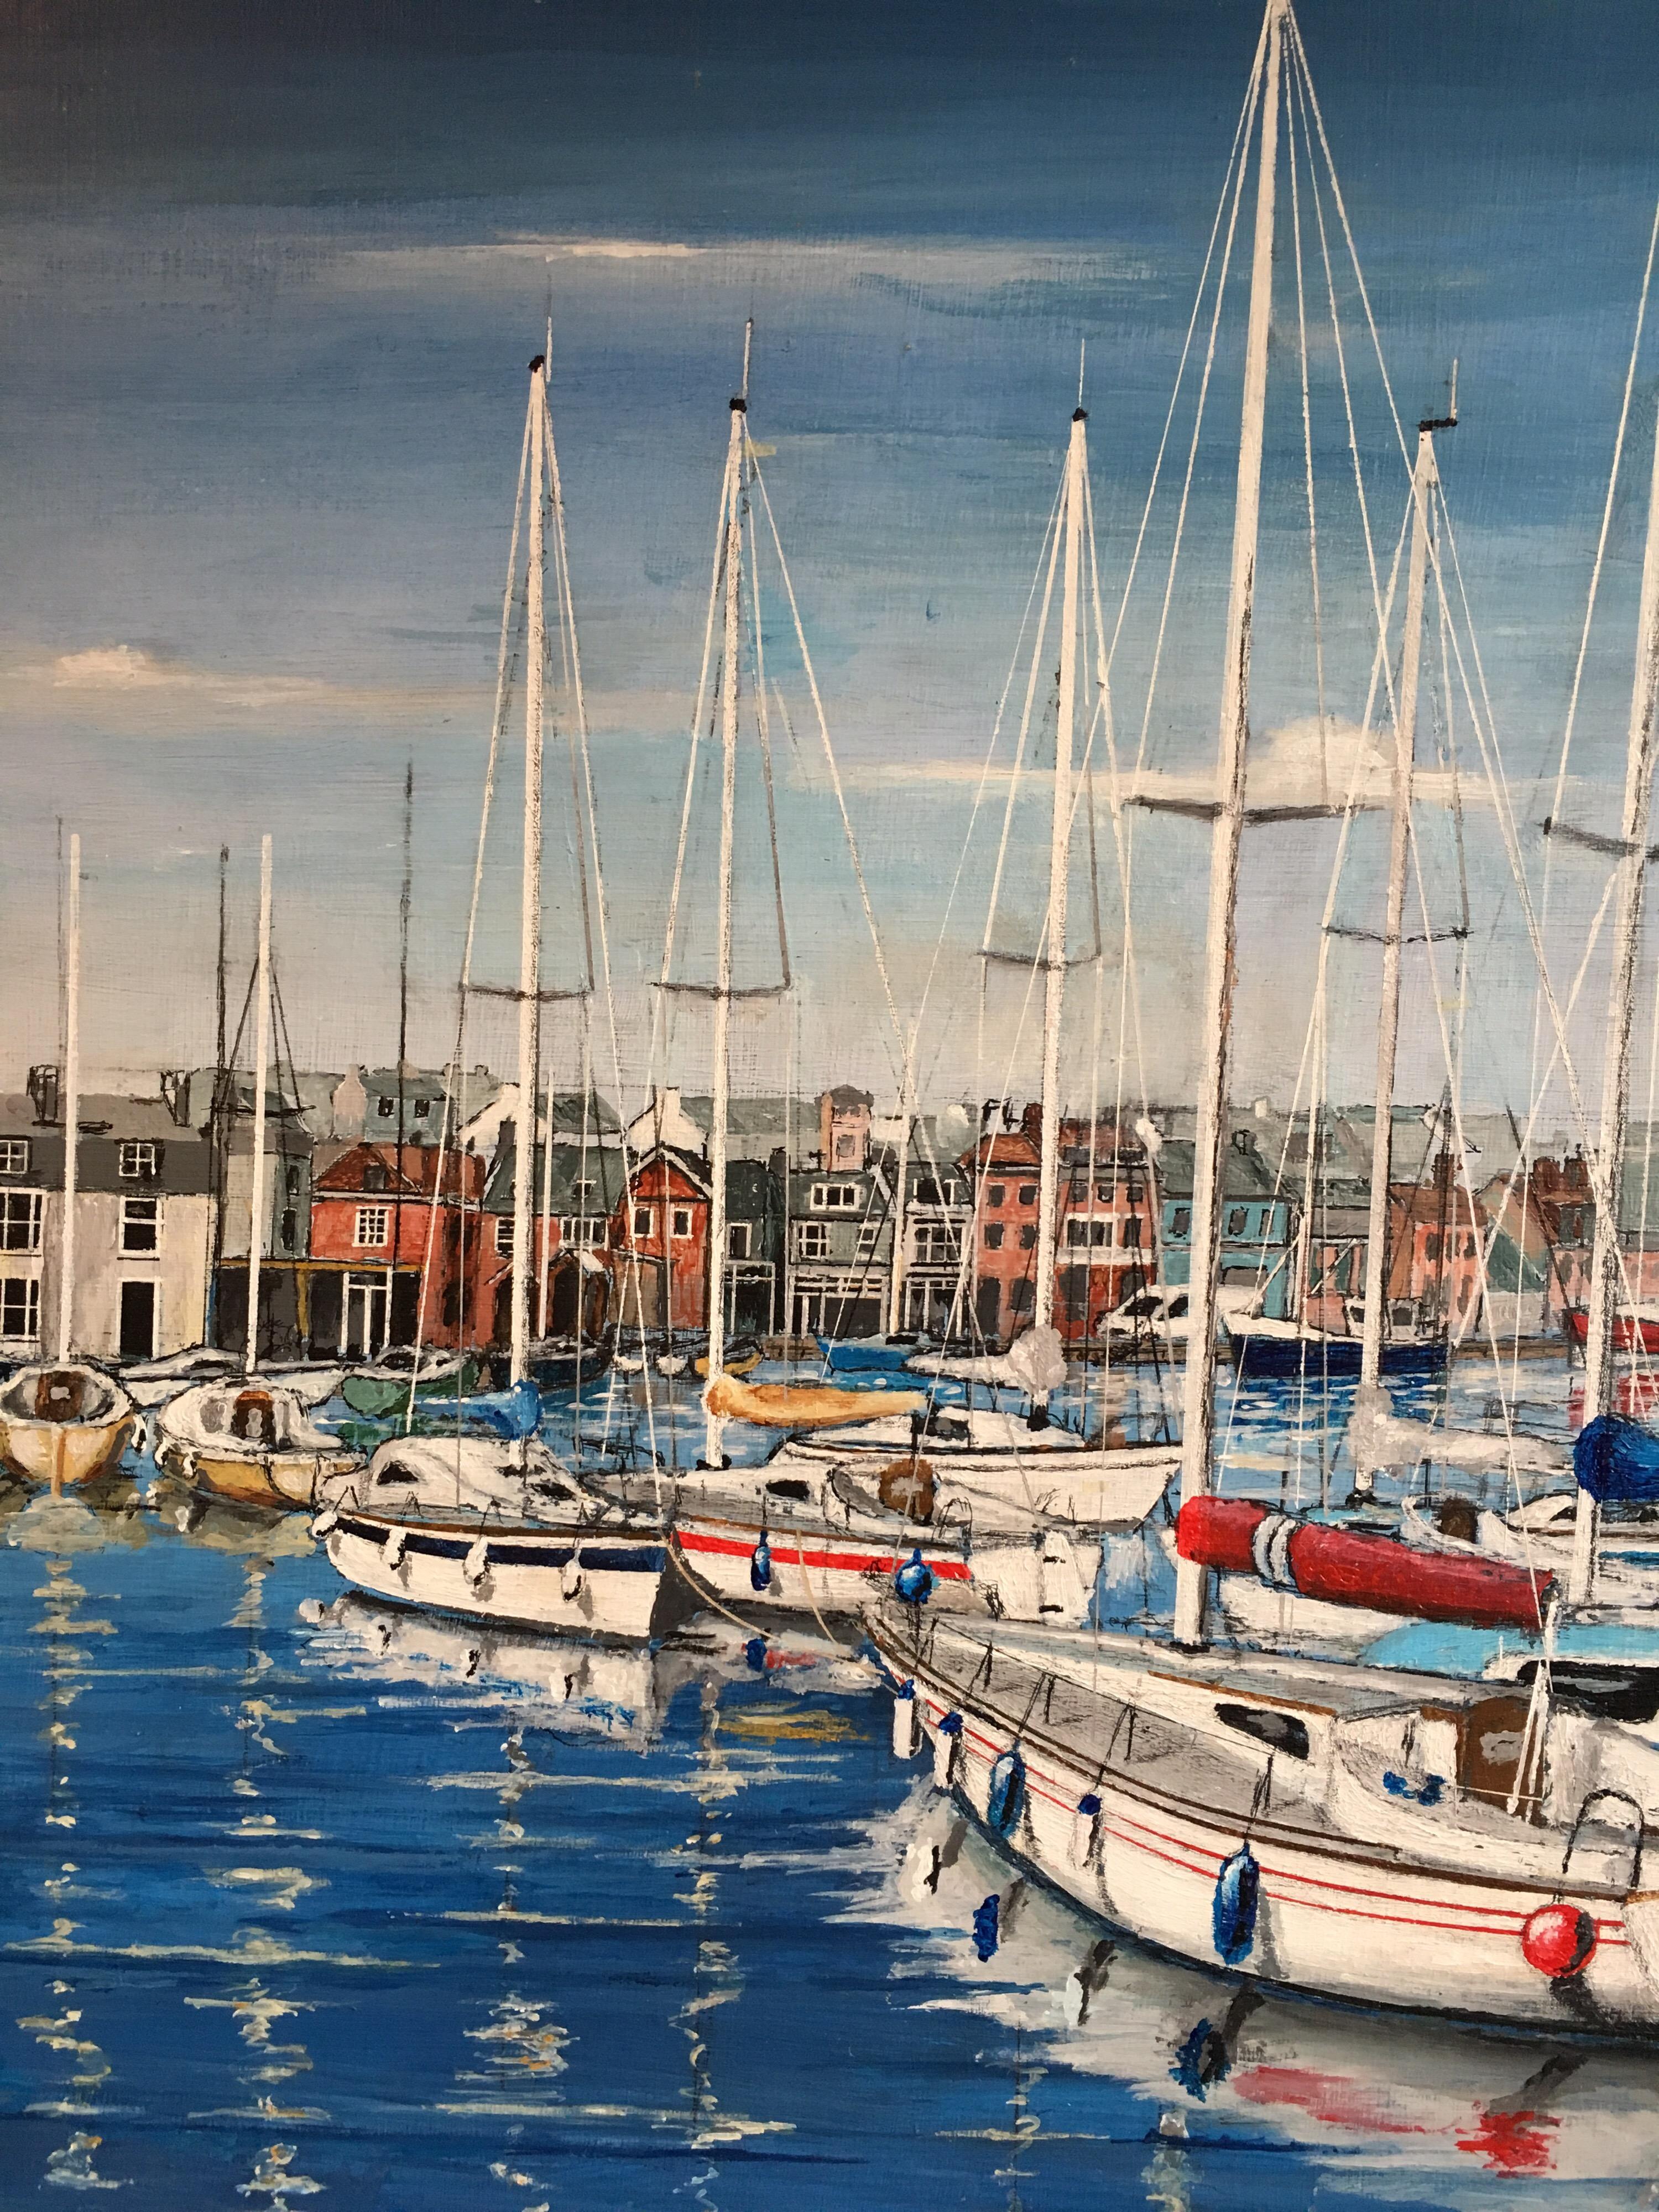 The Harbour, Nautical Themed Landscape Large Signed Oil Painting
by Peter Nichols, British contemporary artist
oil painting on board, unframed
signed by the artist on the lower left hand corner
board size: 18 x 24 inches

Superb original oil